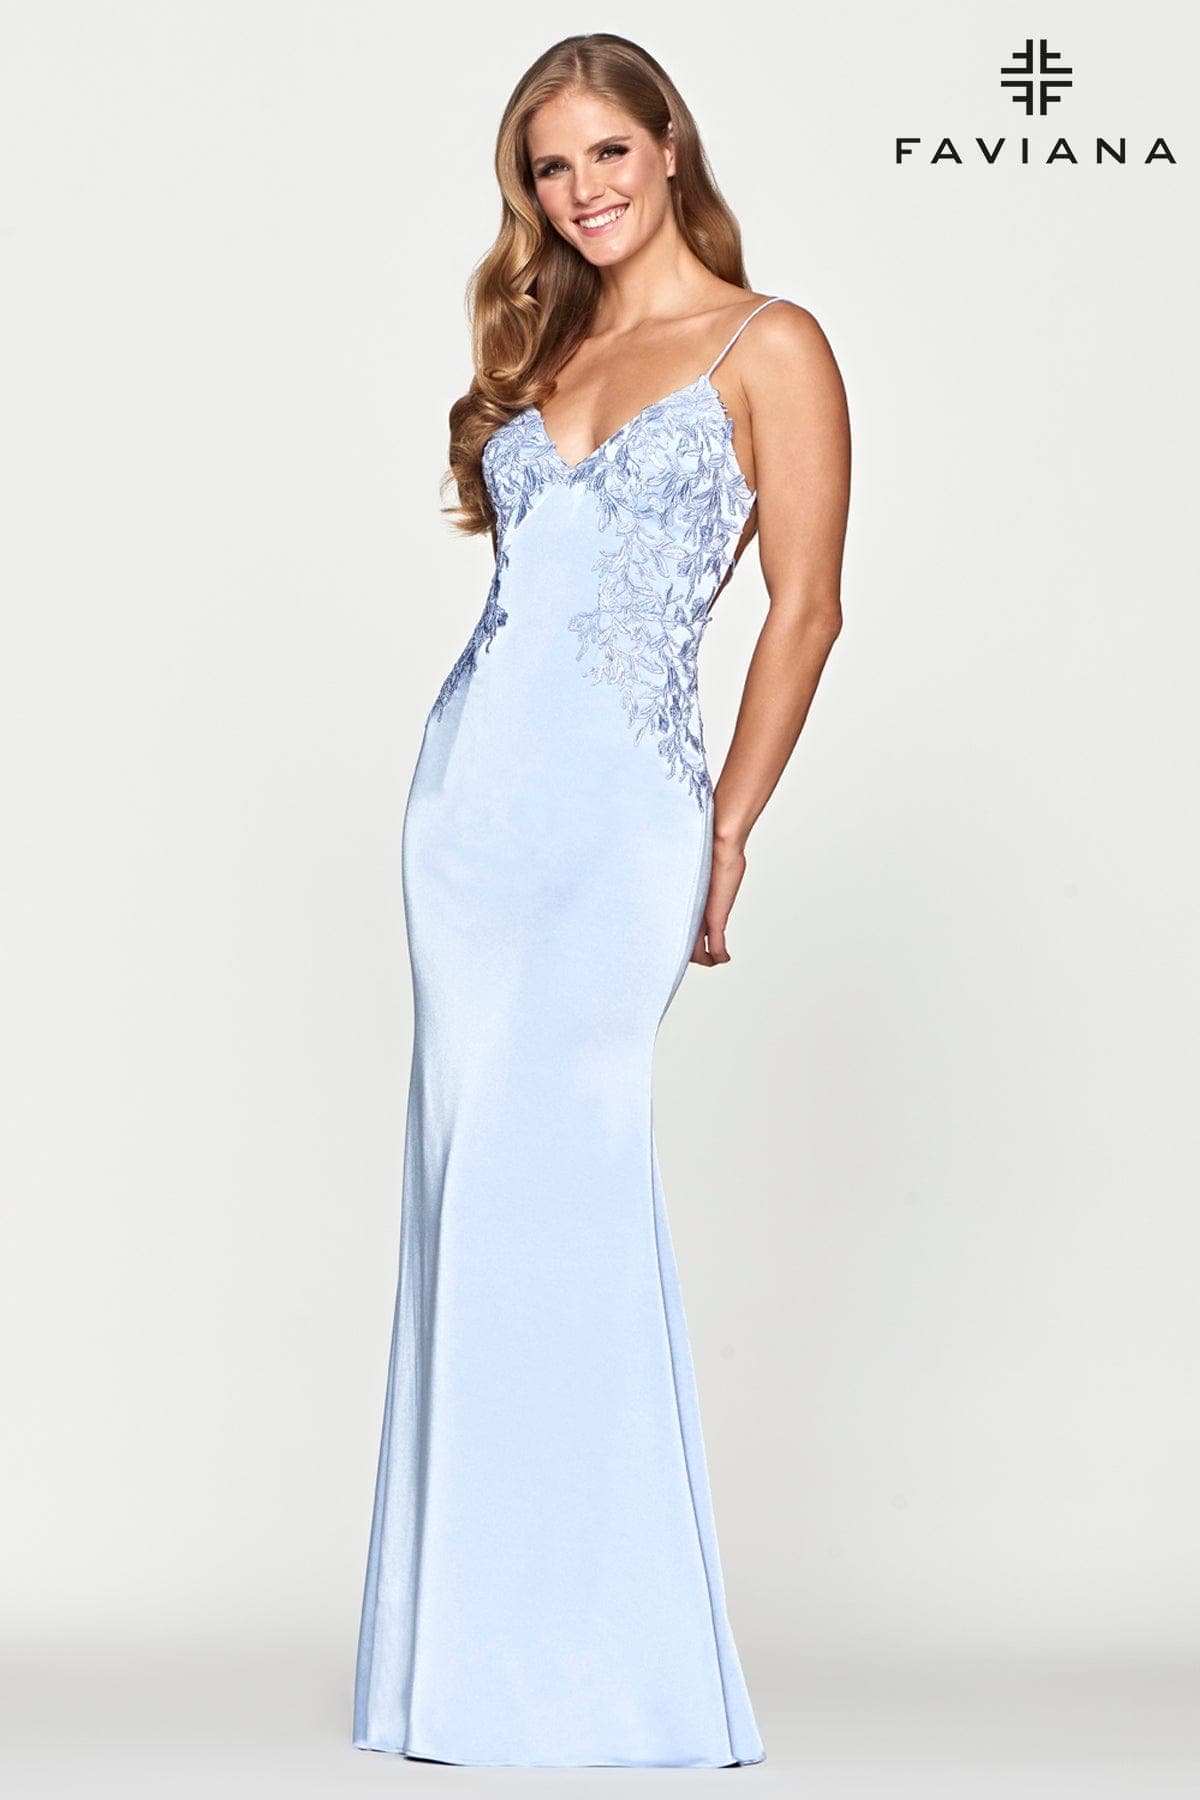 Lace Applique V Neck Prom Dress With Lace Up Back